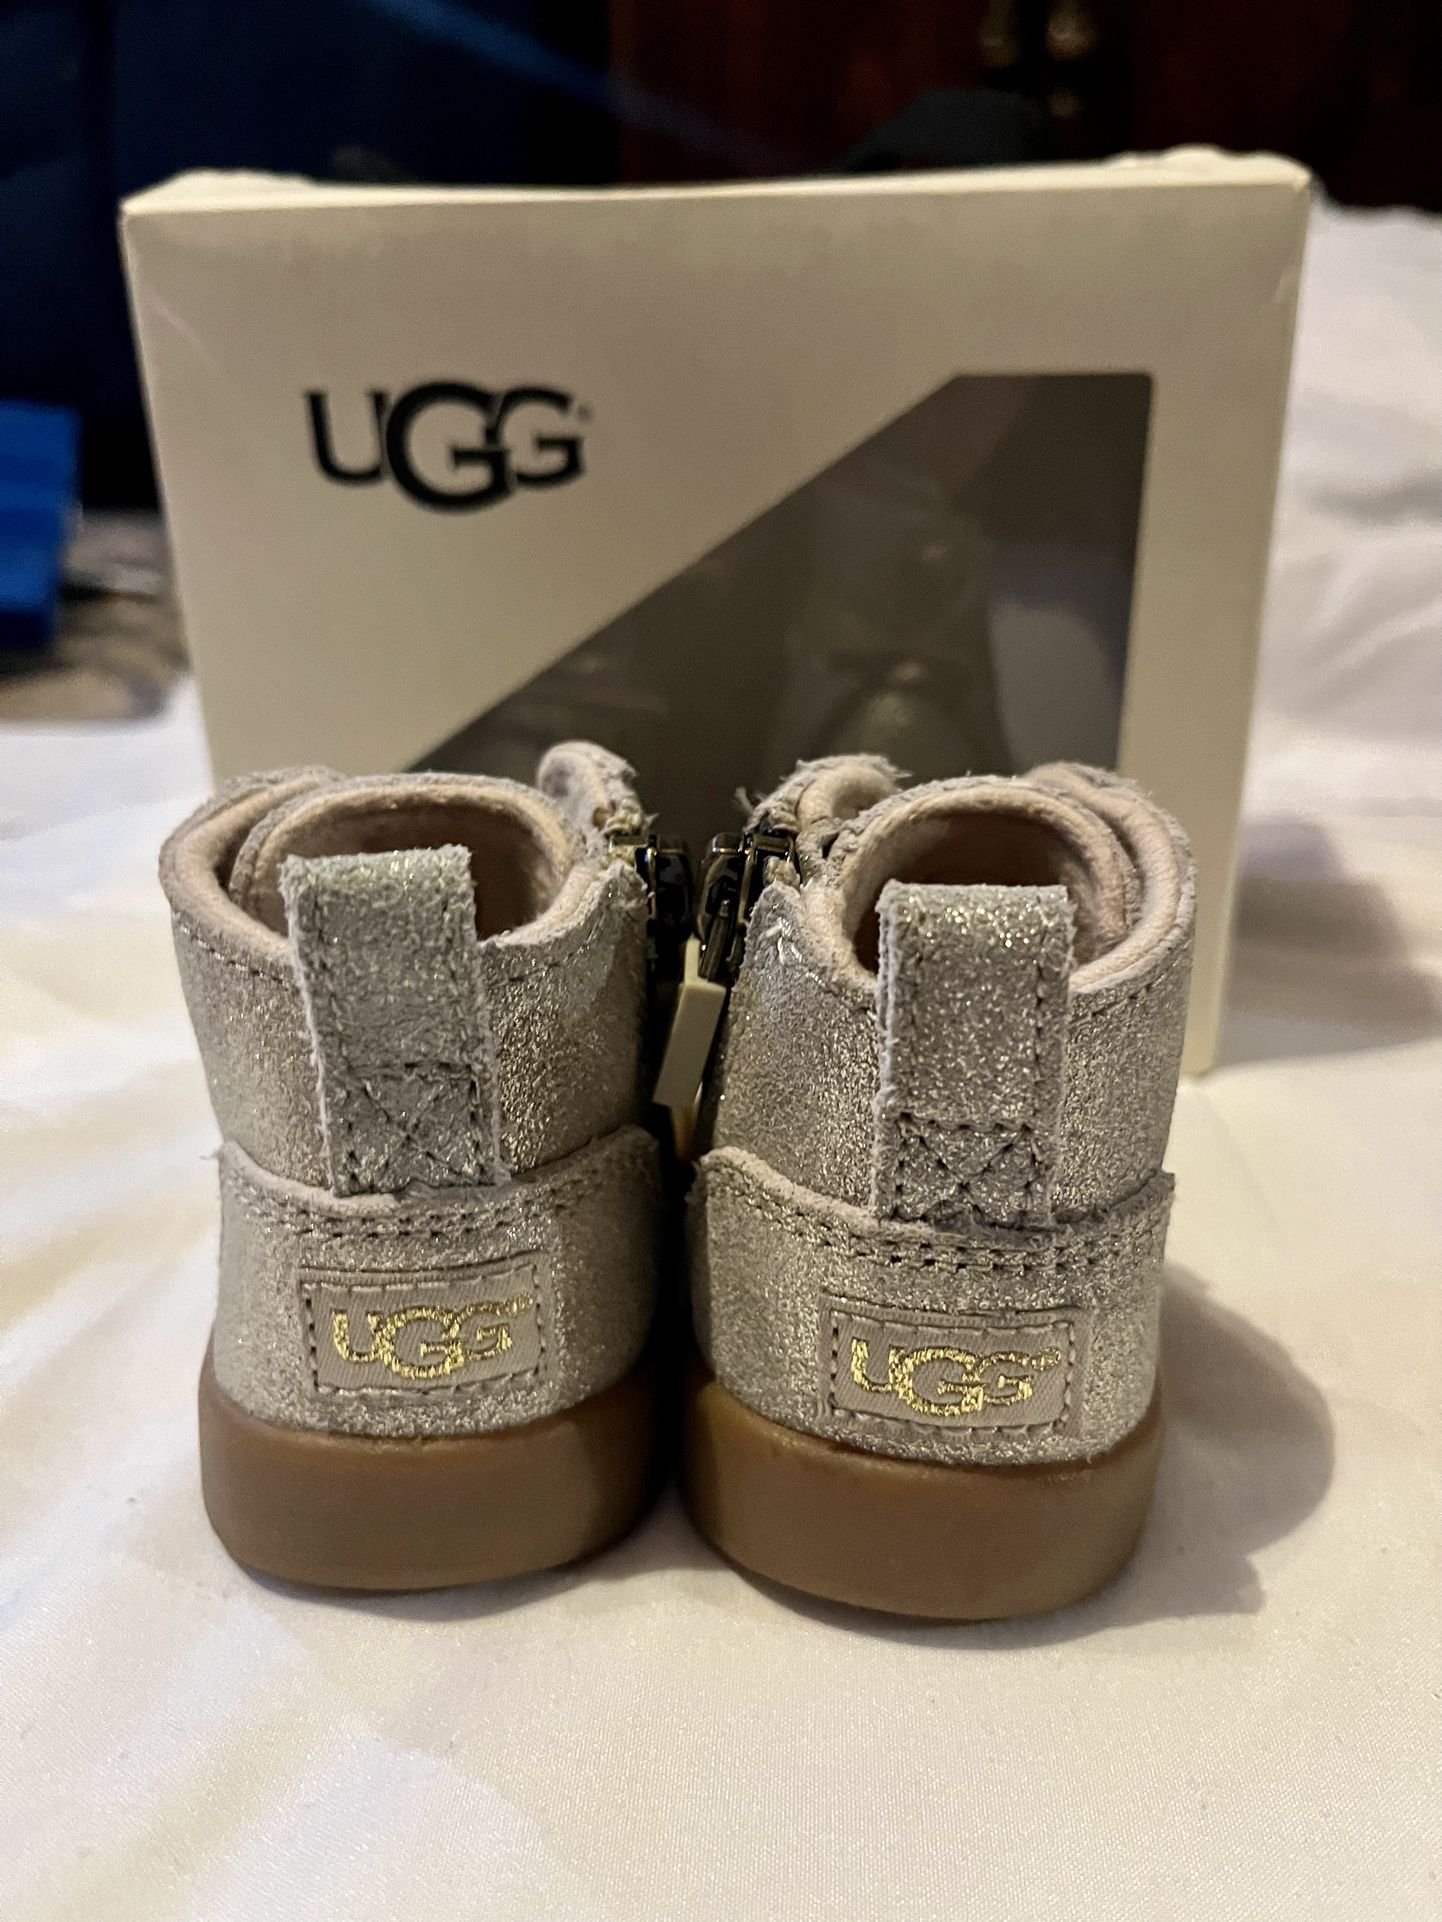 Uggs Baby Size 0/1